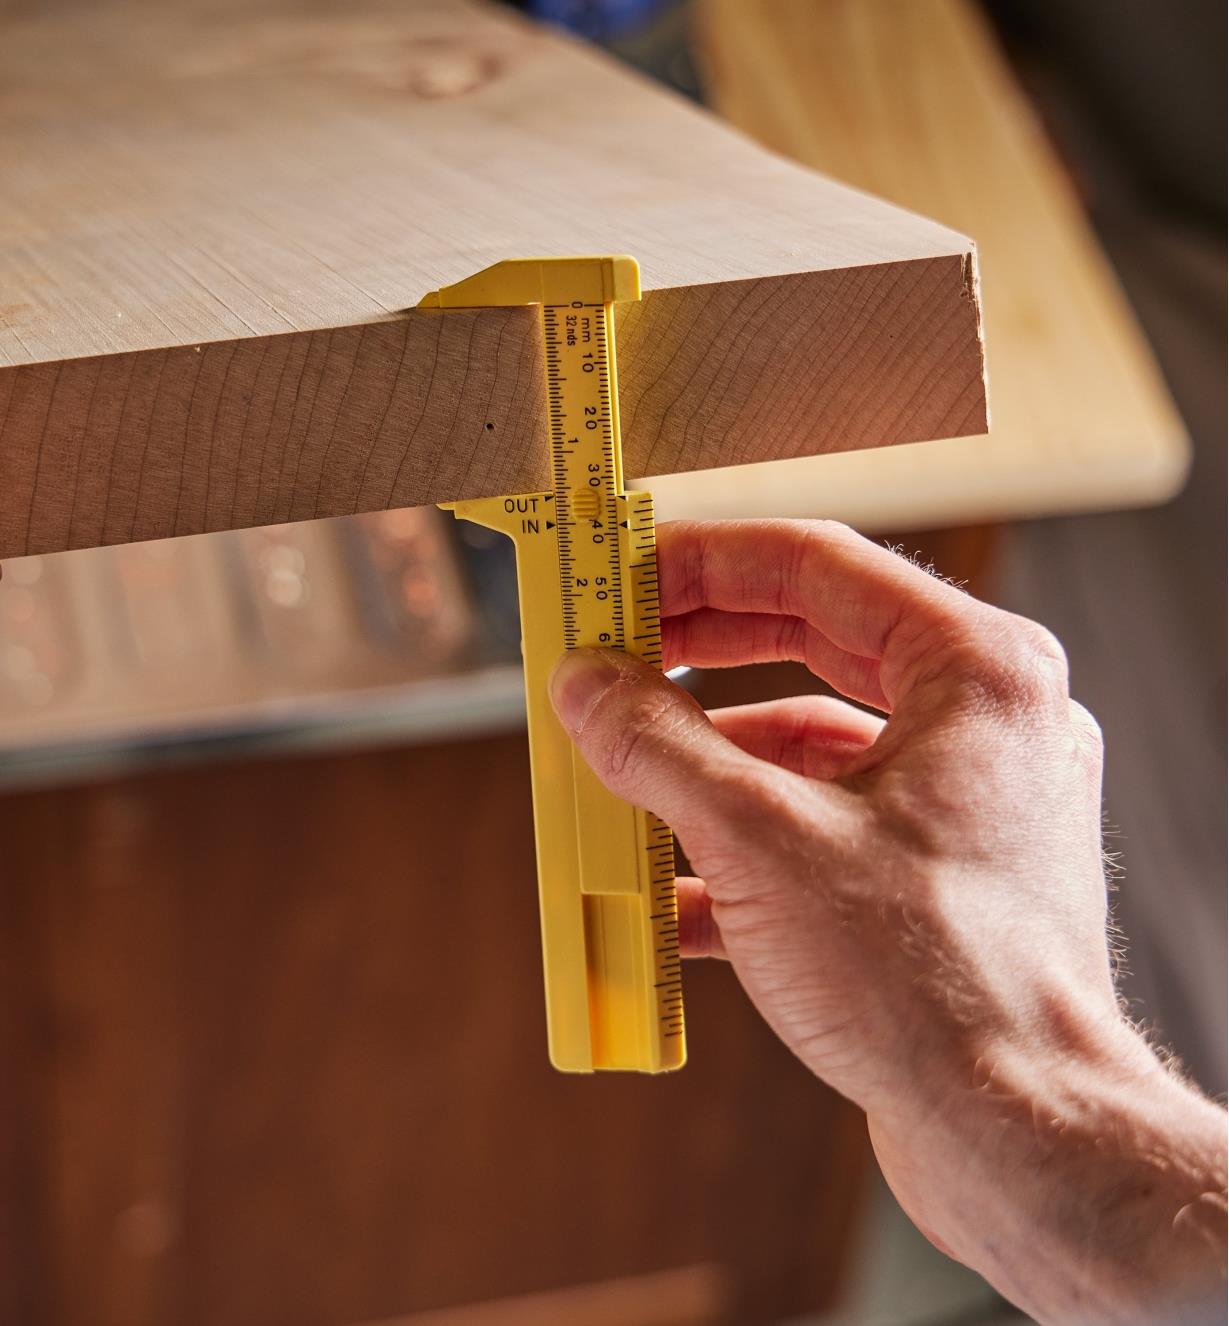 Using a pocket caliper to measure the thickness of a plank of wood